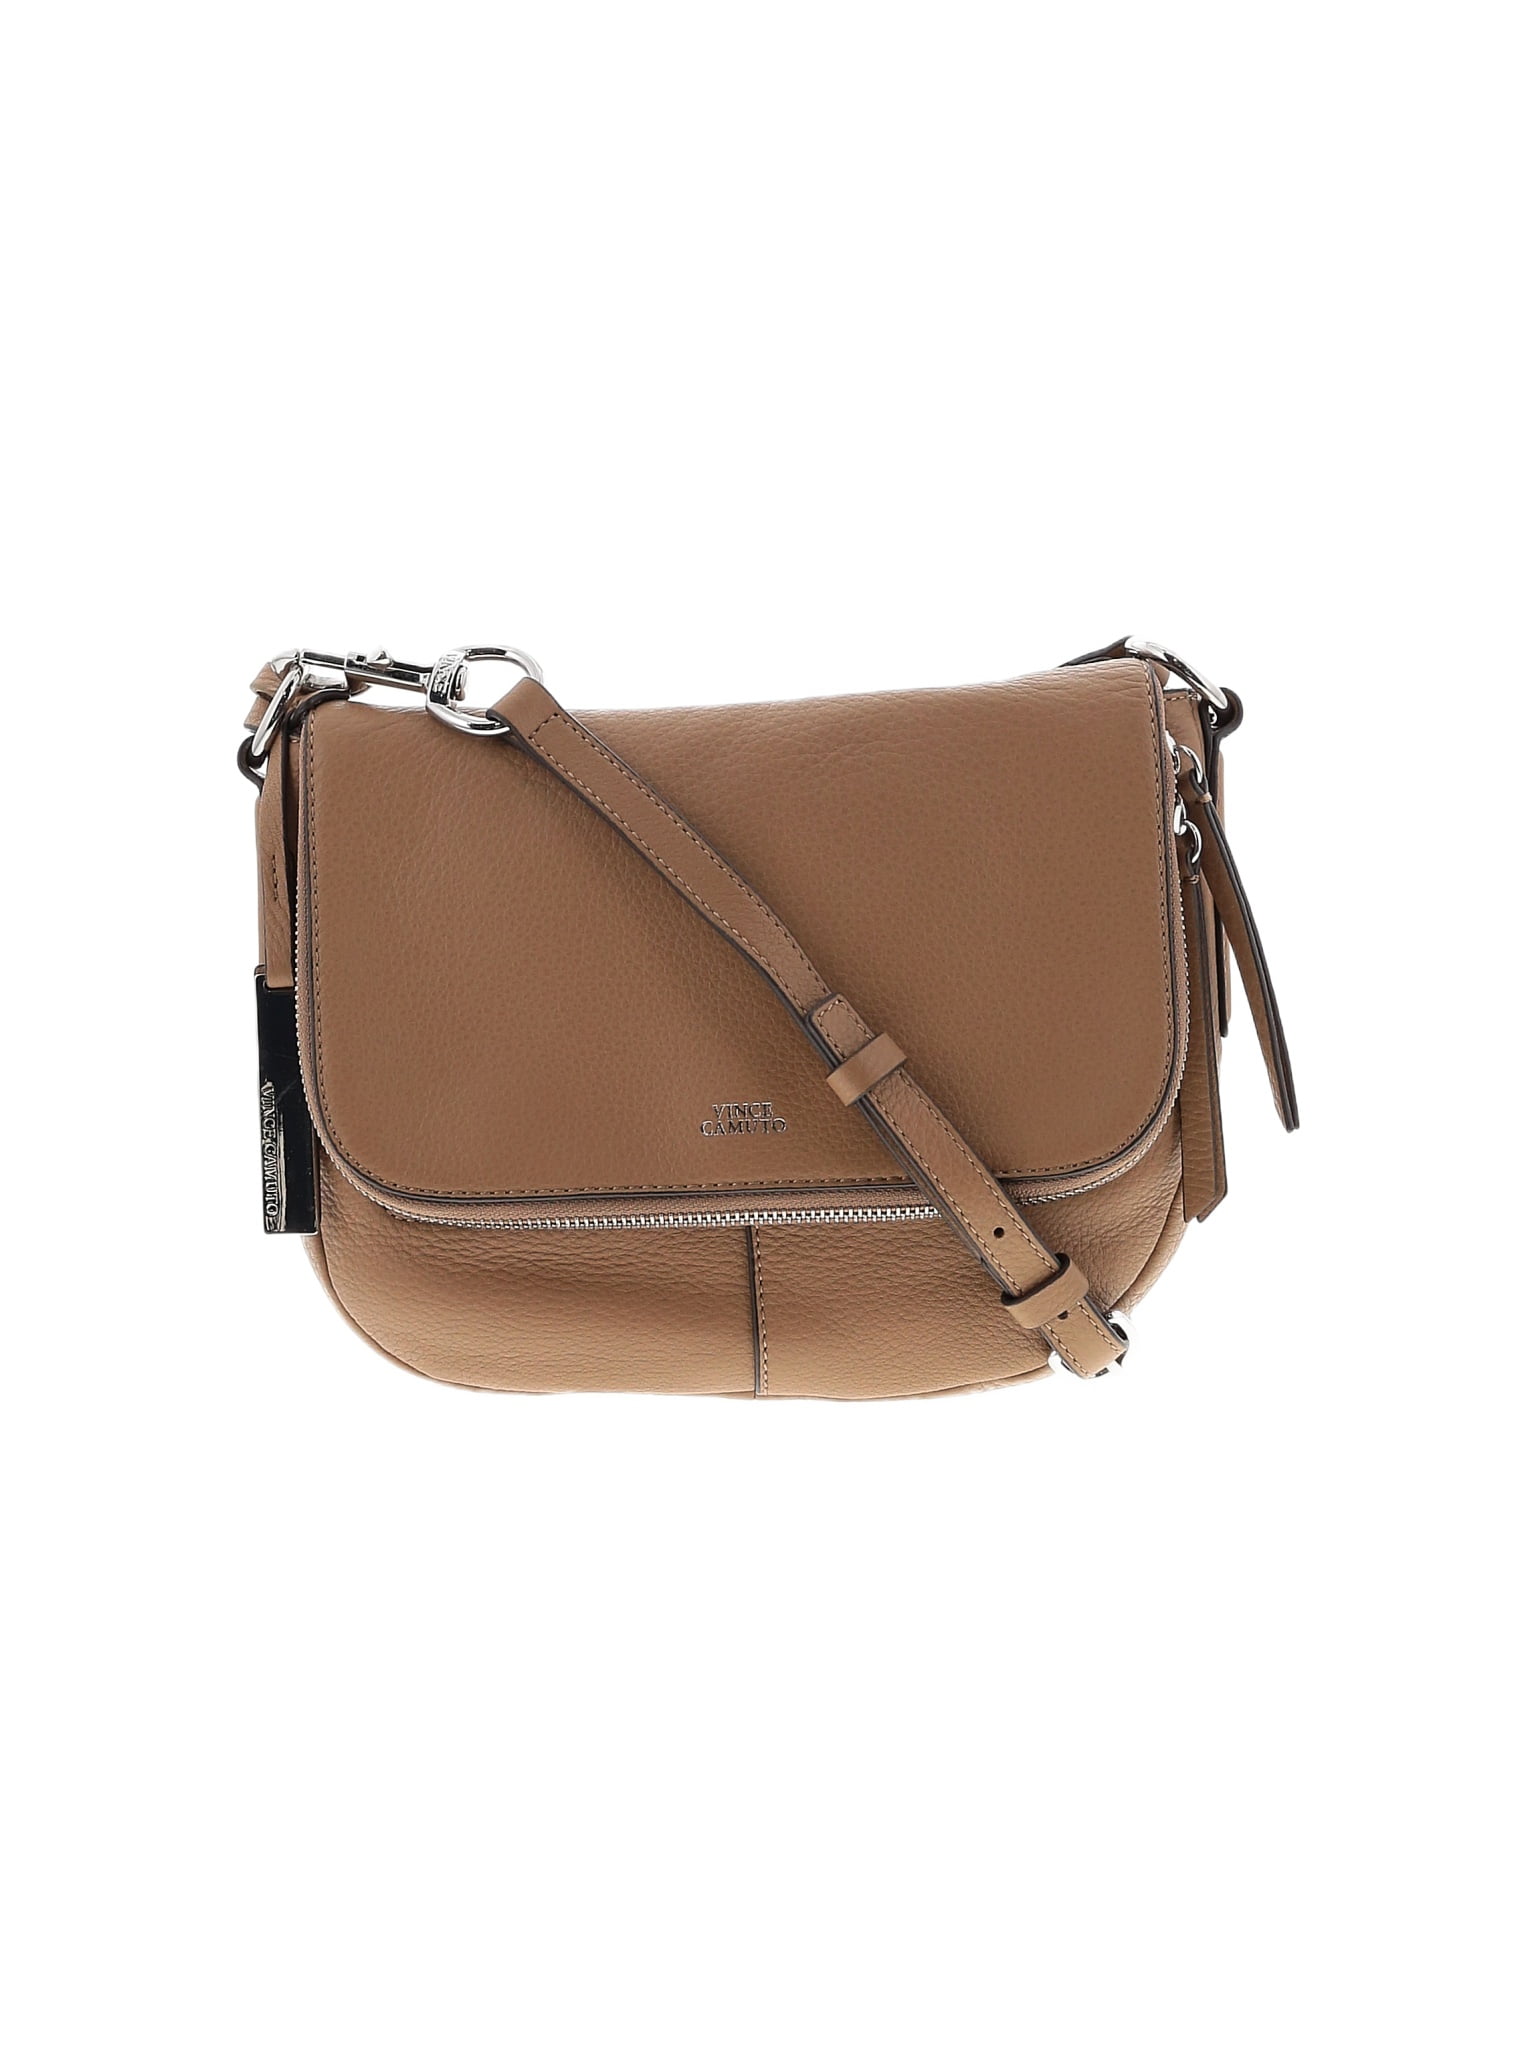 Vince Camuto 100% Leather Solid Tan Leather Crossbody Bag One Size - 63 ...